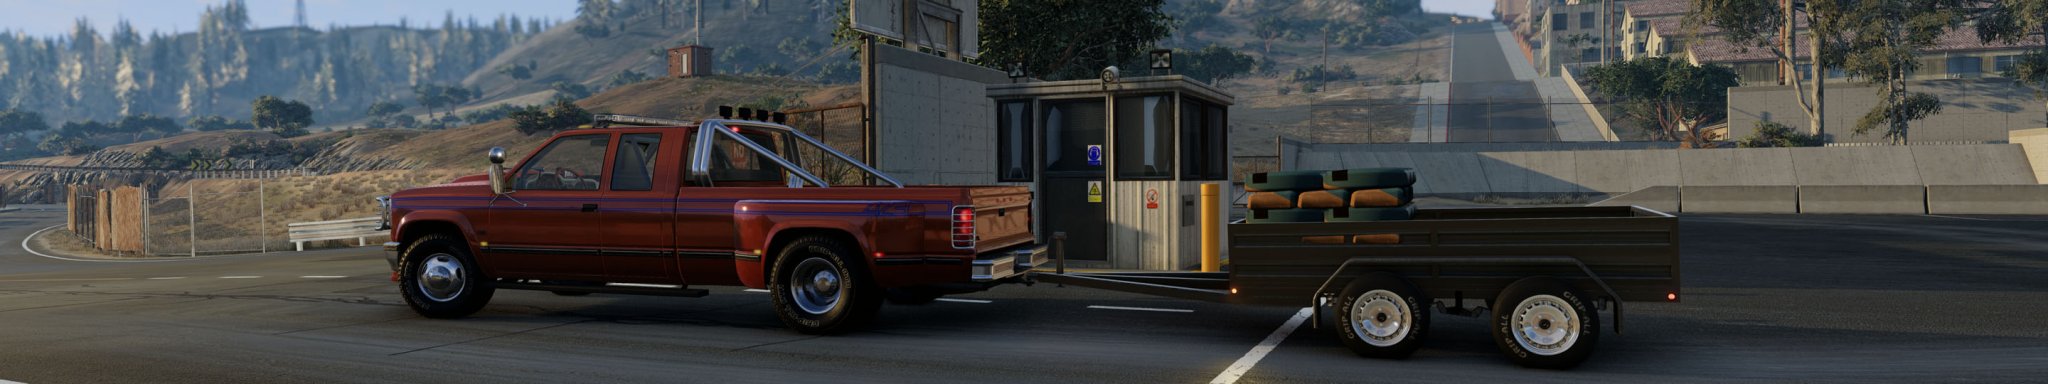 1 BeamNG Gavril D Series DUALLY with TRAILER at SEALBRIK Concrete Plant copy.jpg